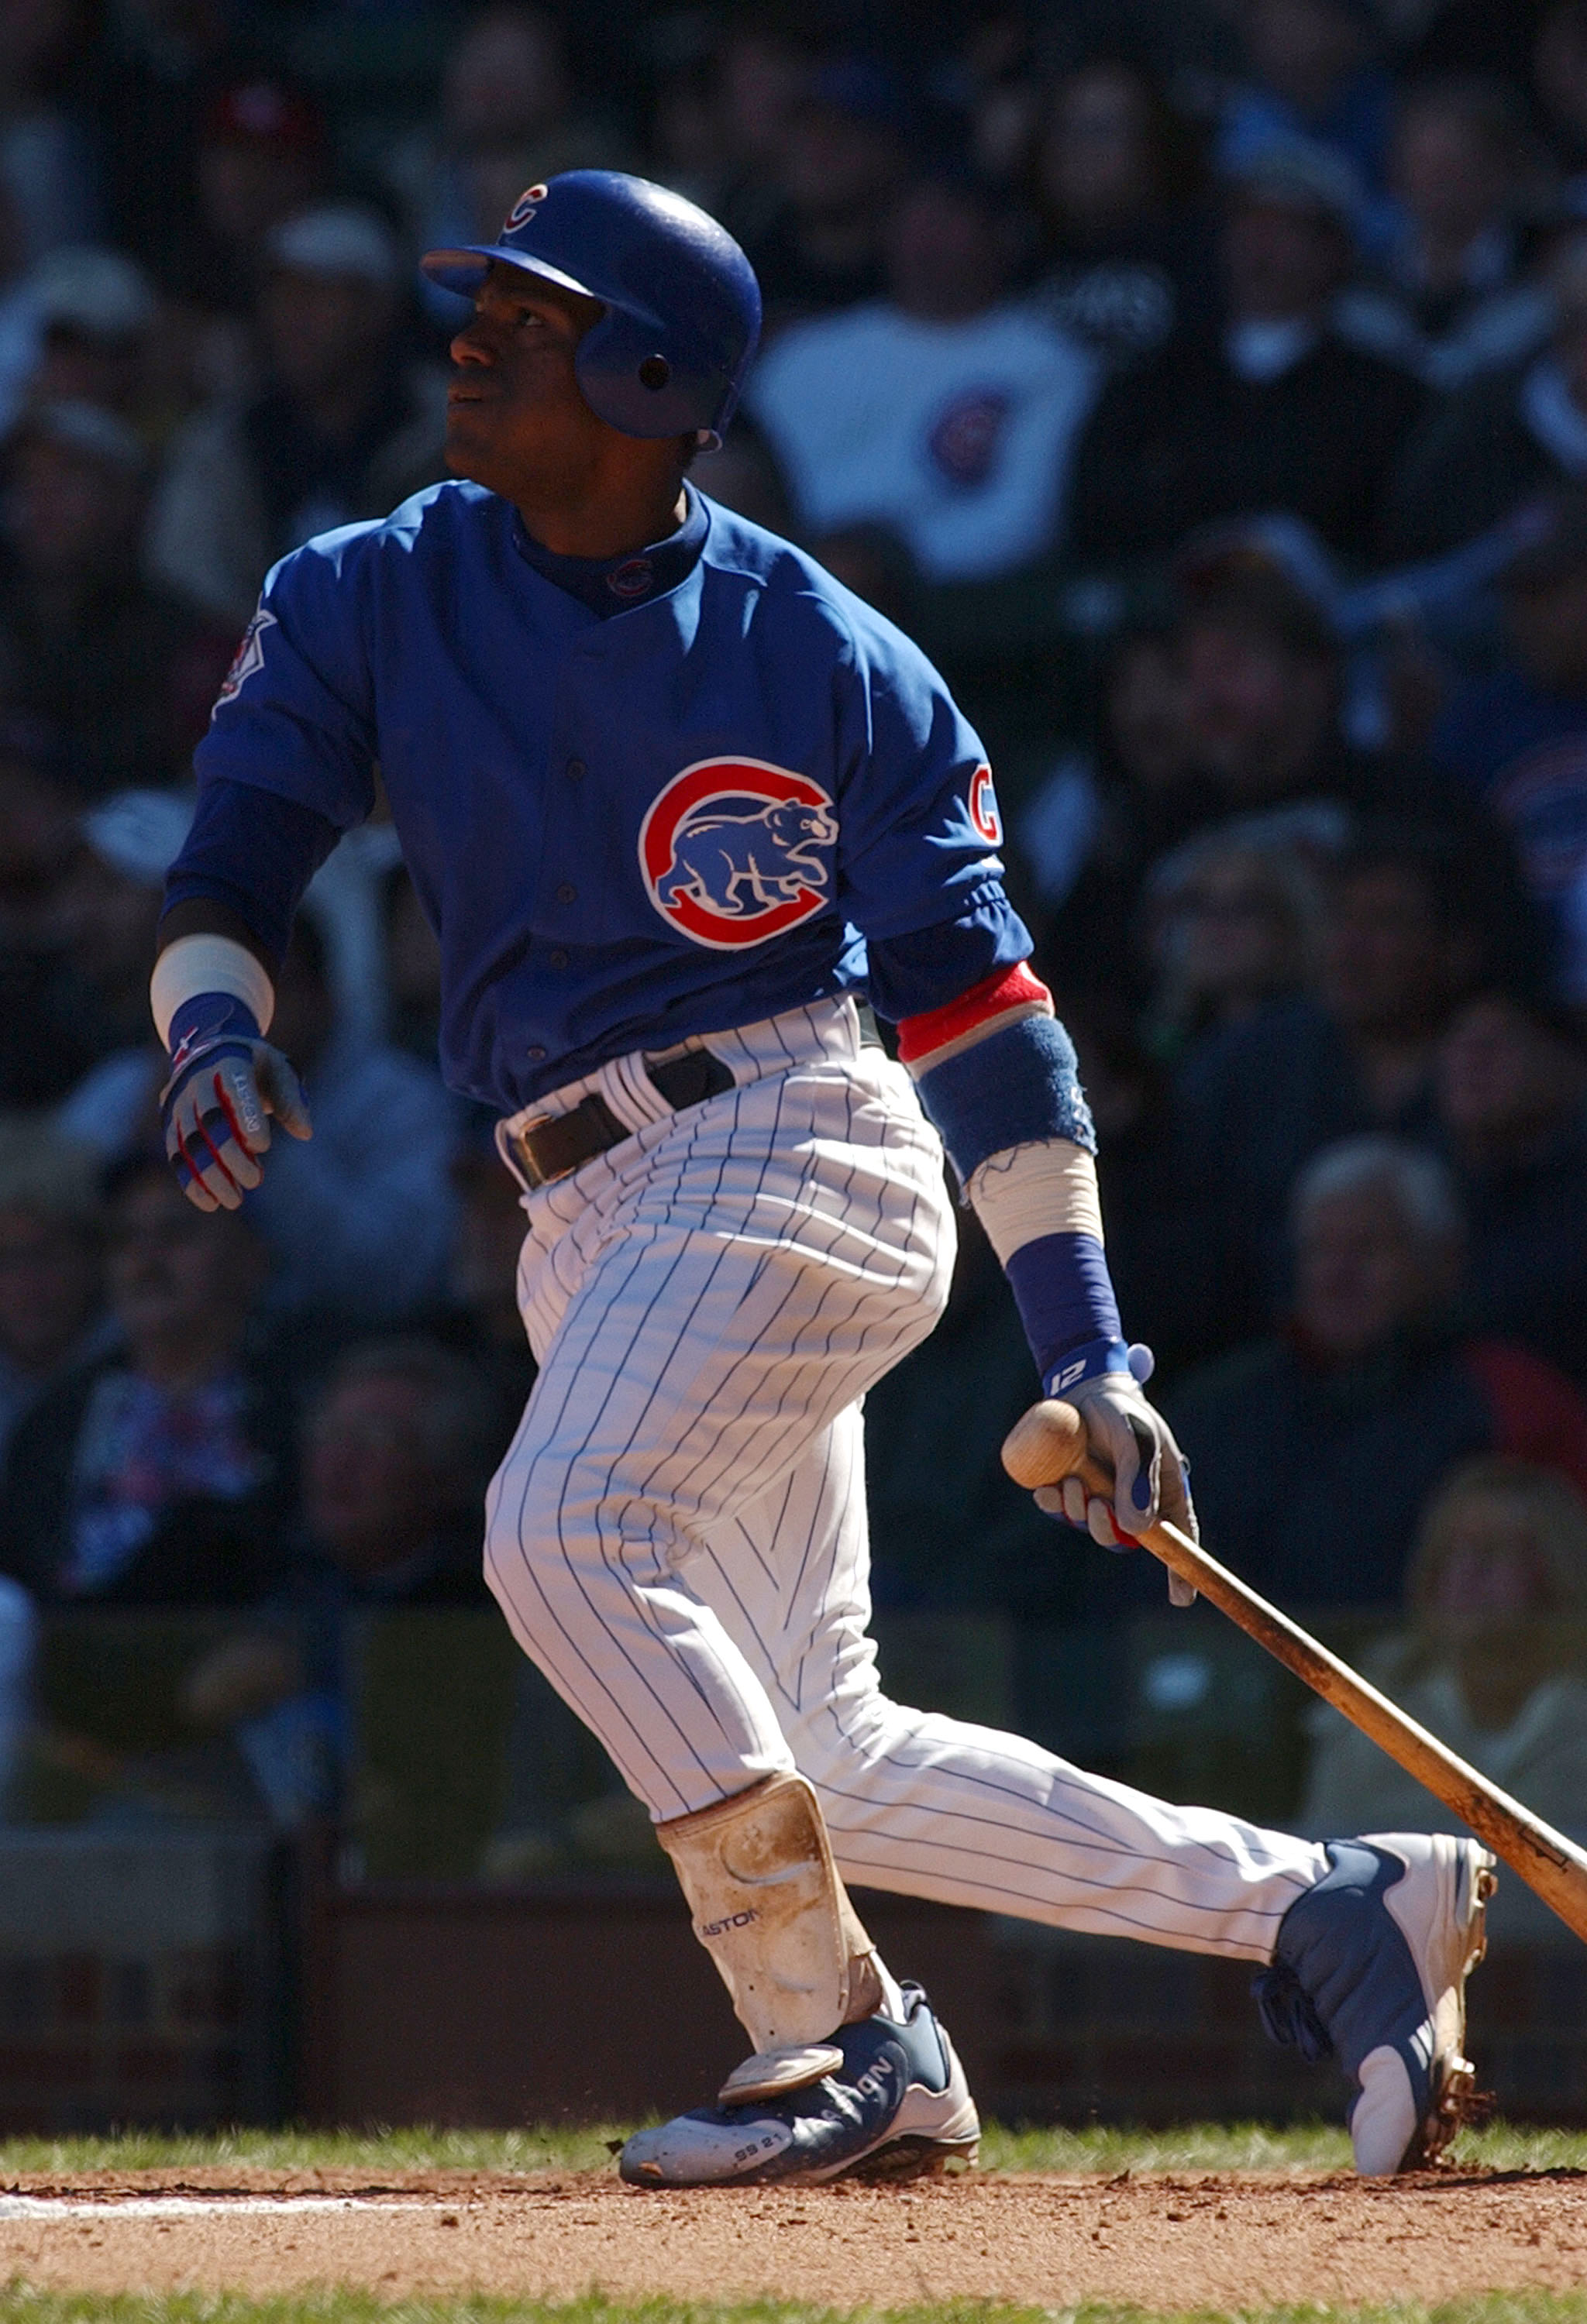 CHICAGO - OCTOBER 2:  Sammy Sosa #21 of the Chicago Cubs hits his 35th home run of the year and the 574th of his career putting him in sole possession of 7th place on the MLB all-time home run list during a game against the Atlanta Braves on October 2, 20